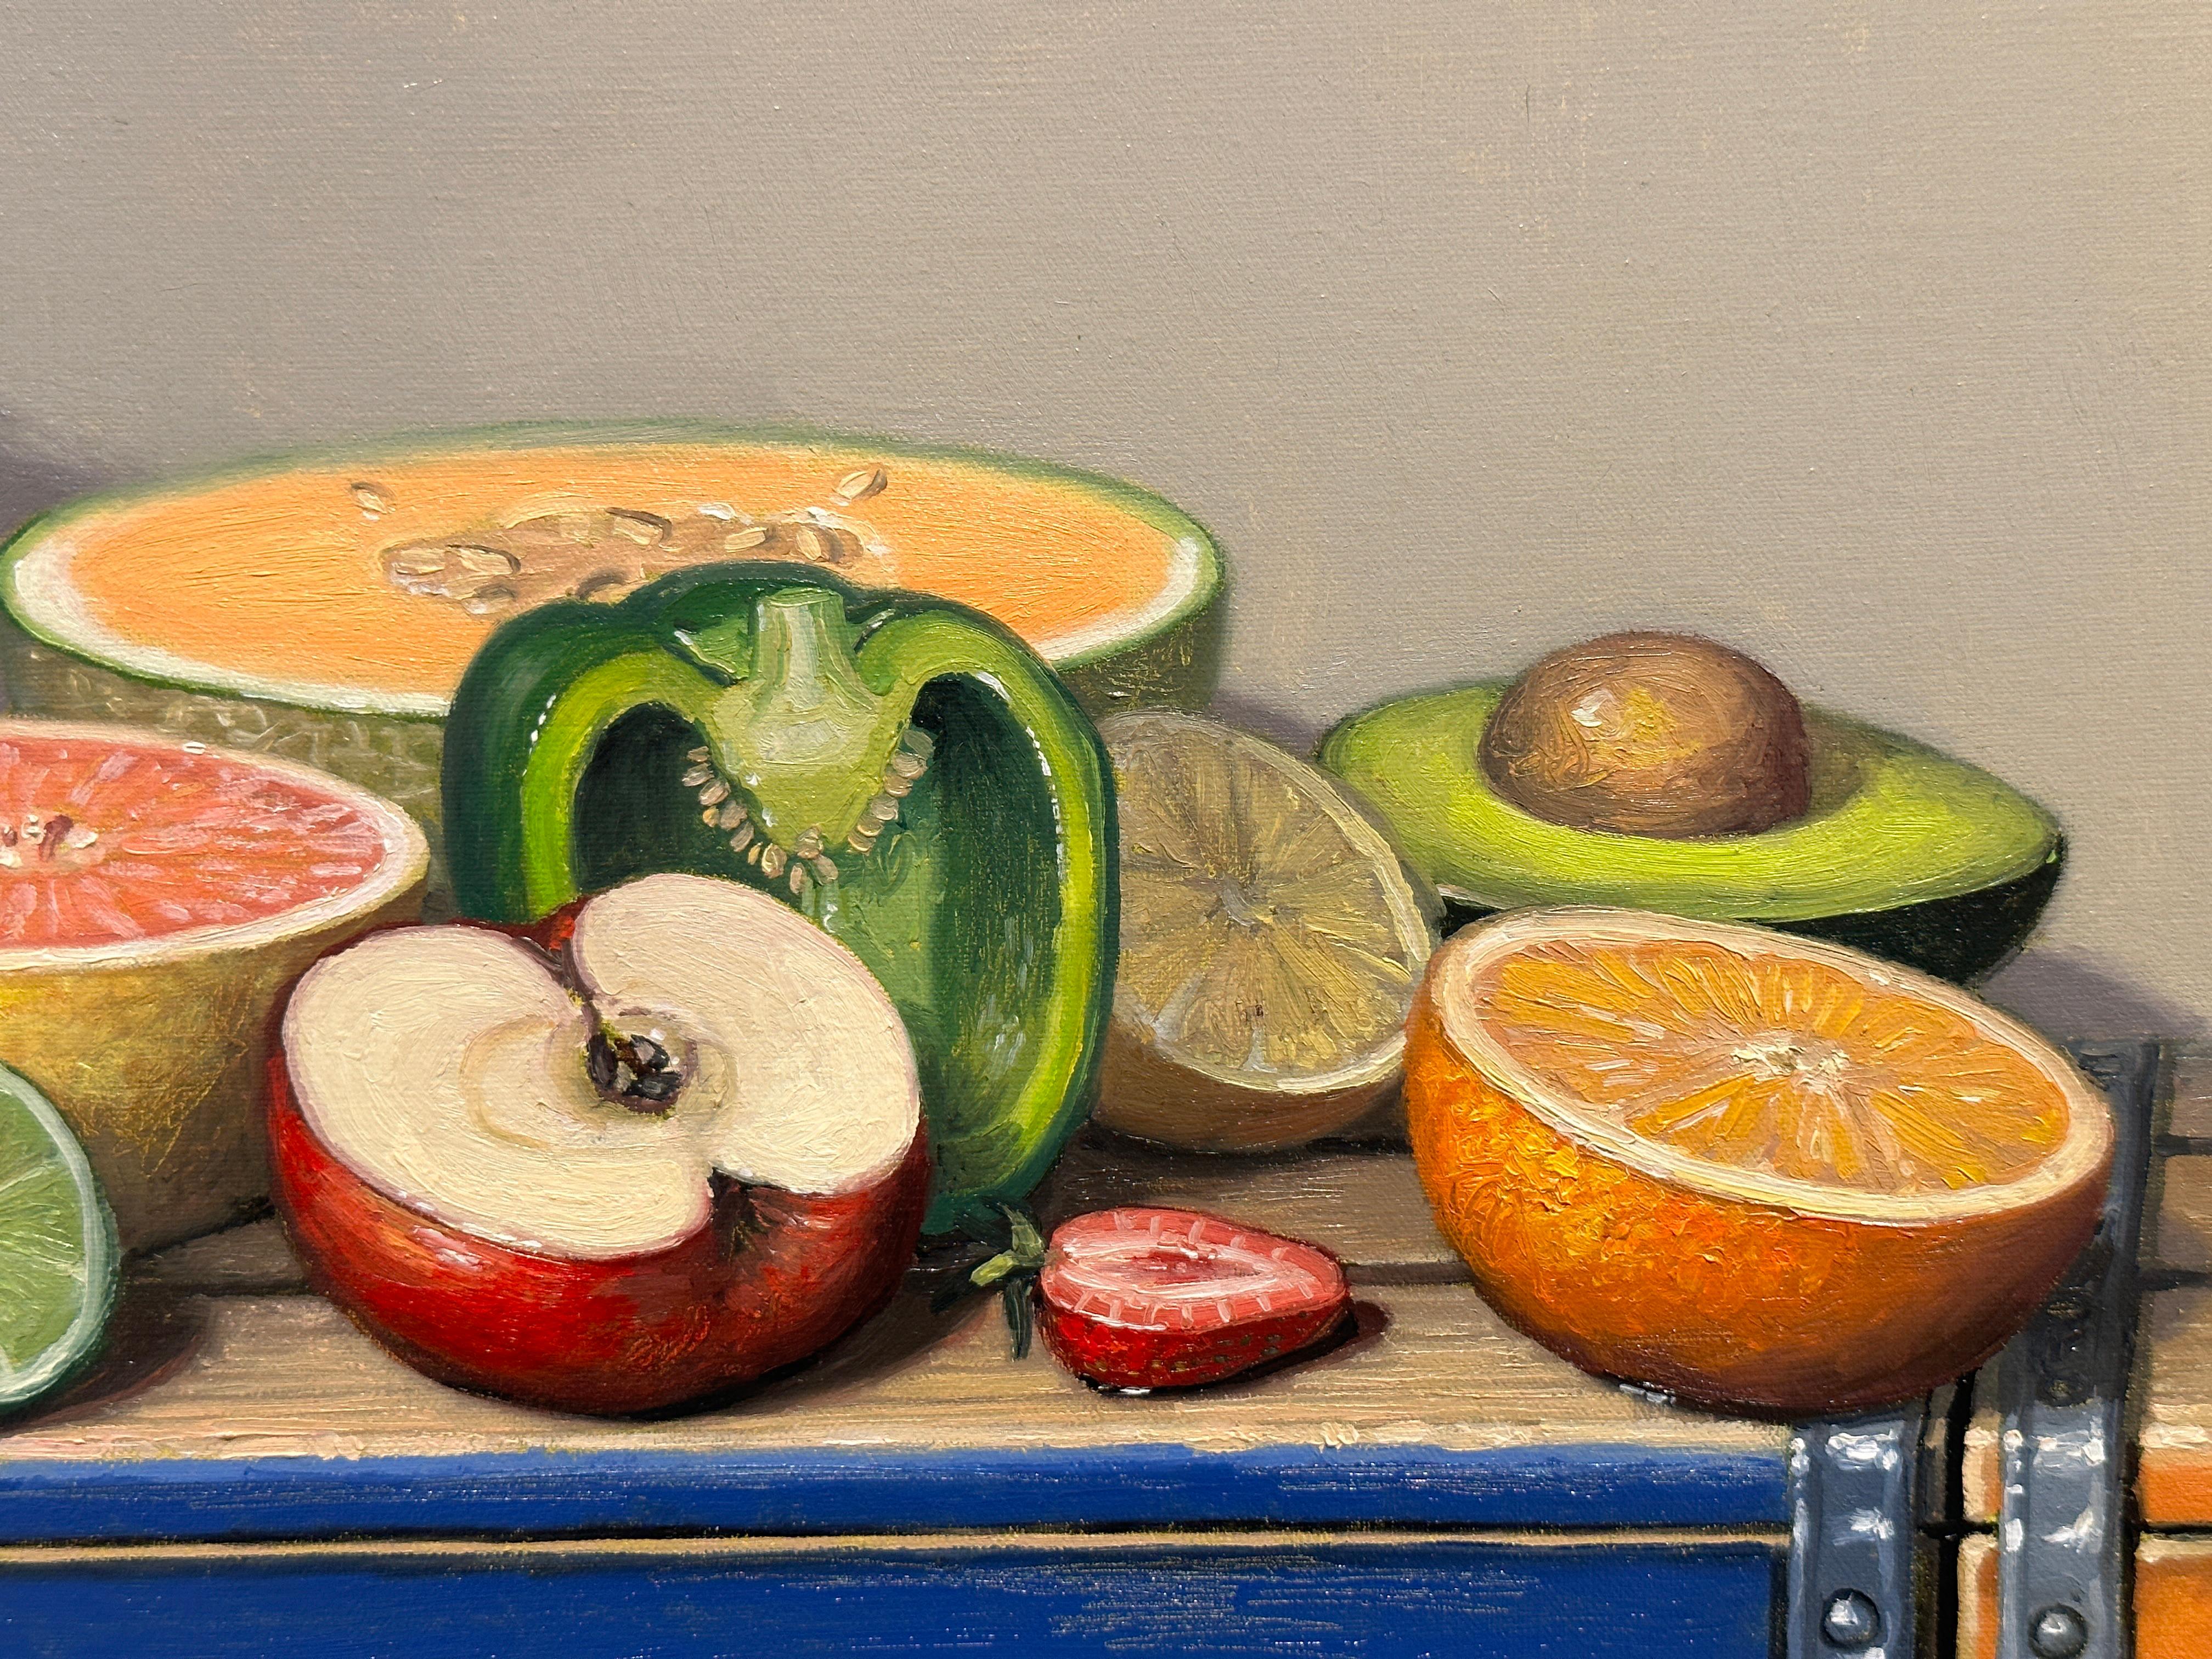 HALFSIES - Contemporary Realism / Food Art / Still Life For Sale 2